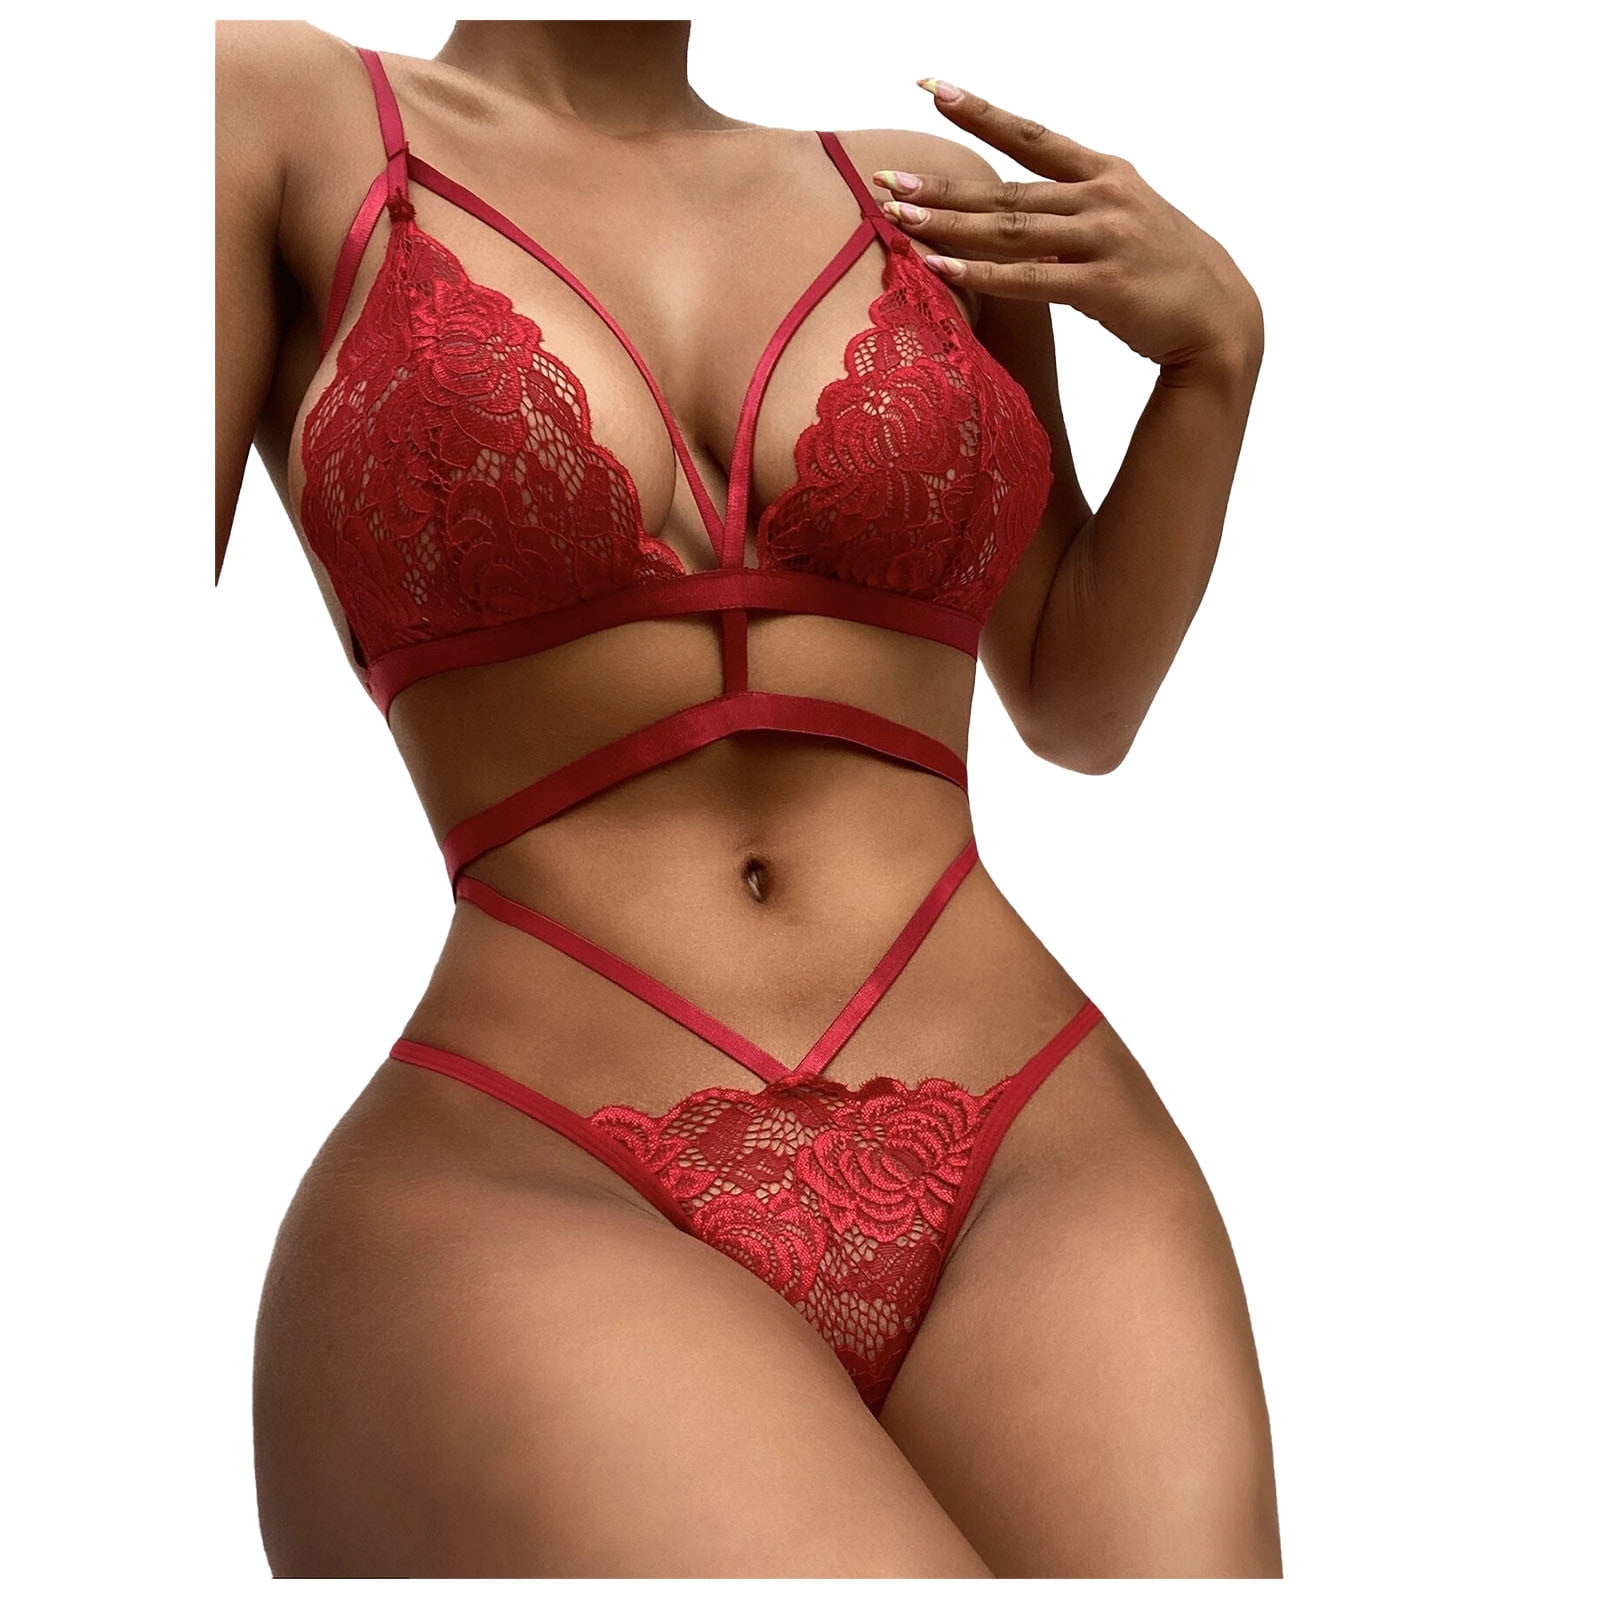 GuessLookry 2023 Bra And Panty Sets For Women Sexy Women Lingerie Lace Hollow Out Temptation Babydoll Underwear Panties Underpants Sleepwear Briefs Suit New Year Gift photo